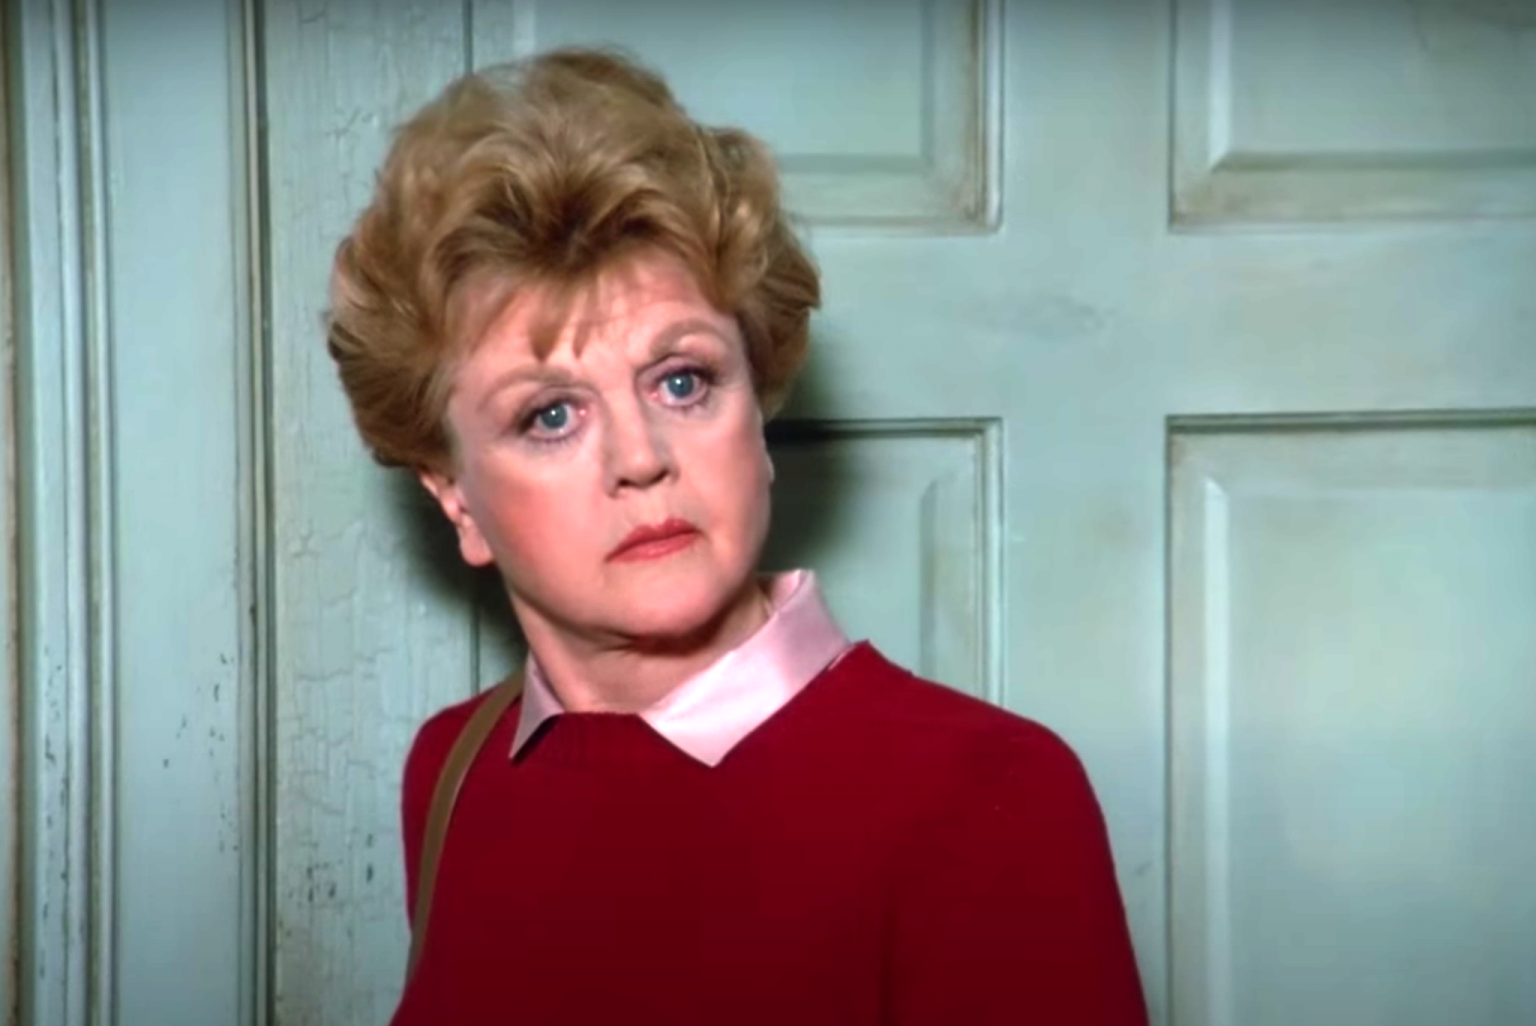 The Odd Case For “Murder, She Wrote”